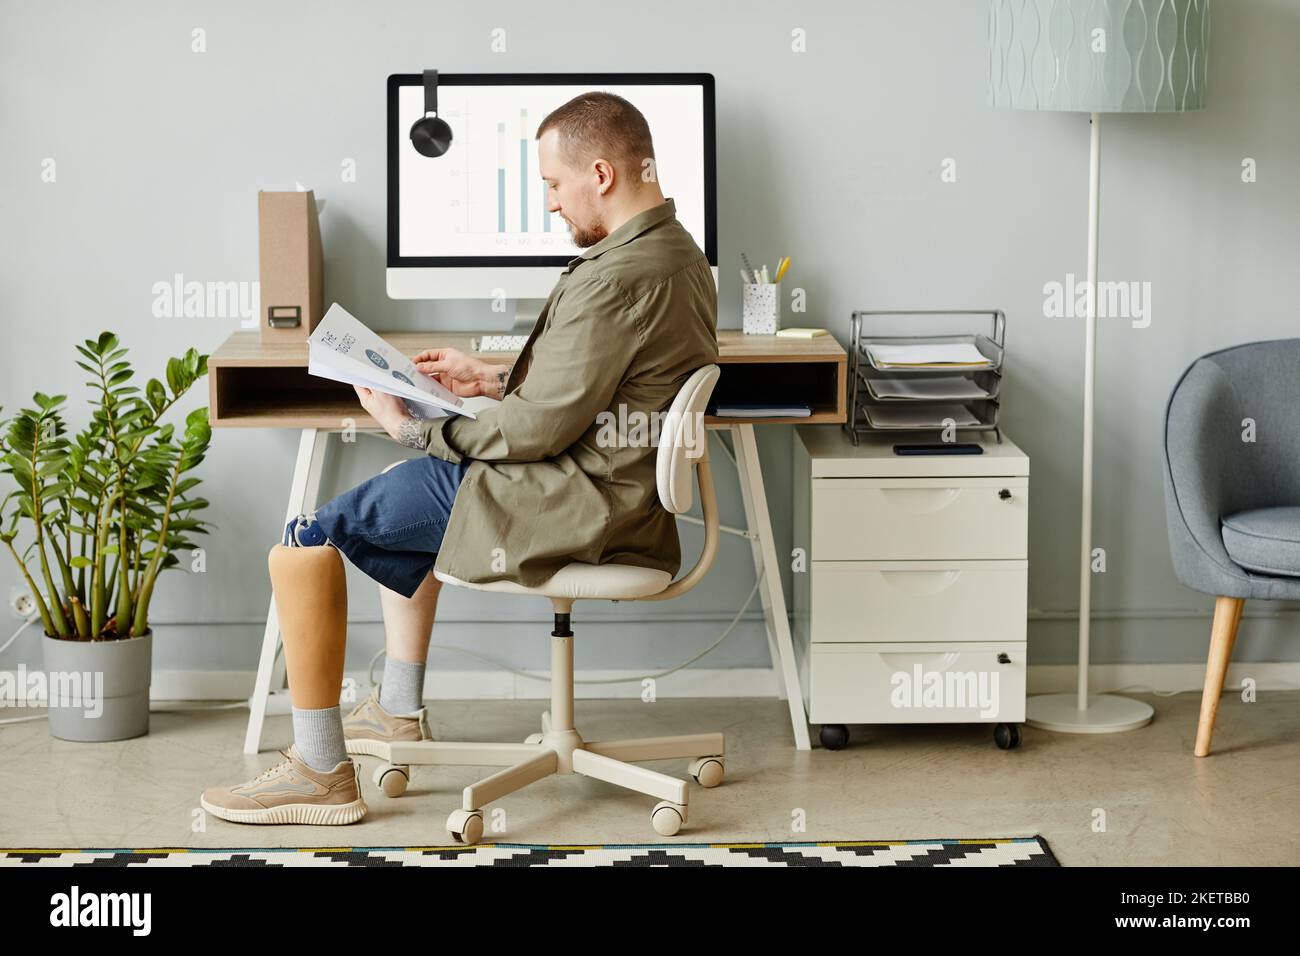 Minimal full length portrait of man with prosthetic leg working at home office and reading documents, copy space Stock Photo